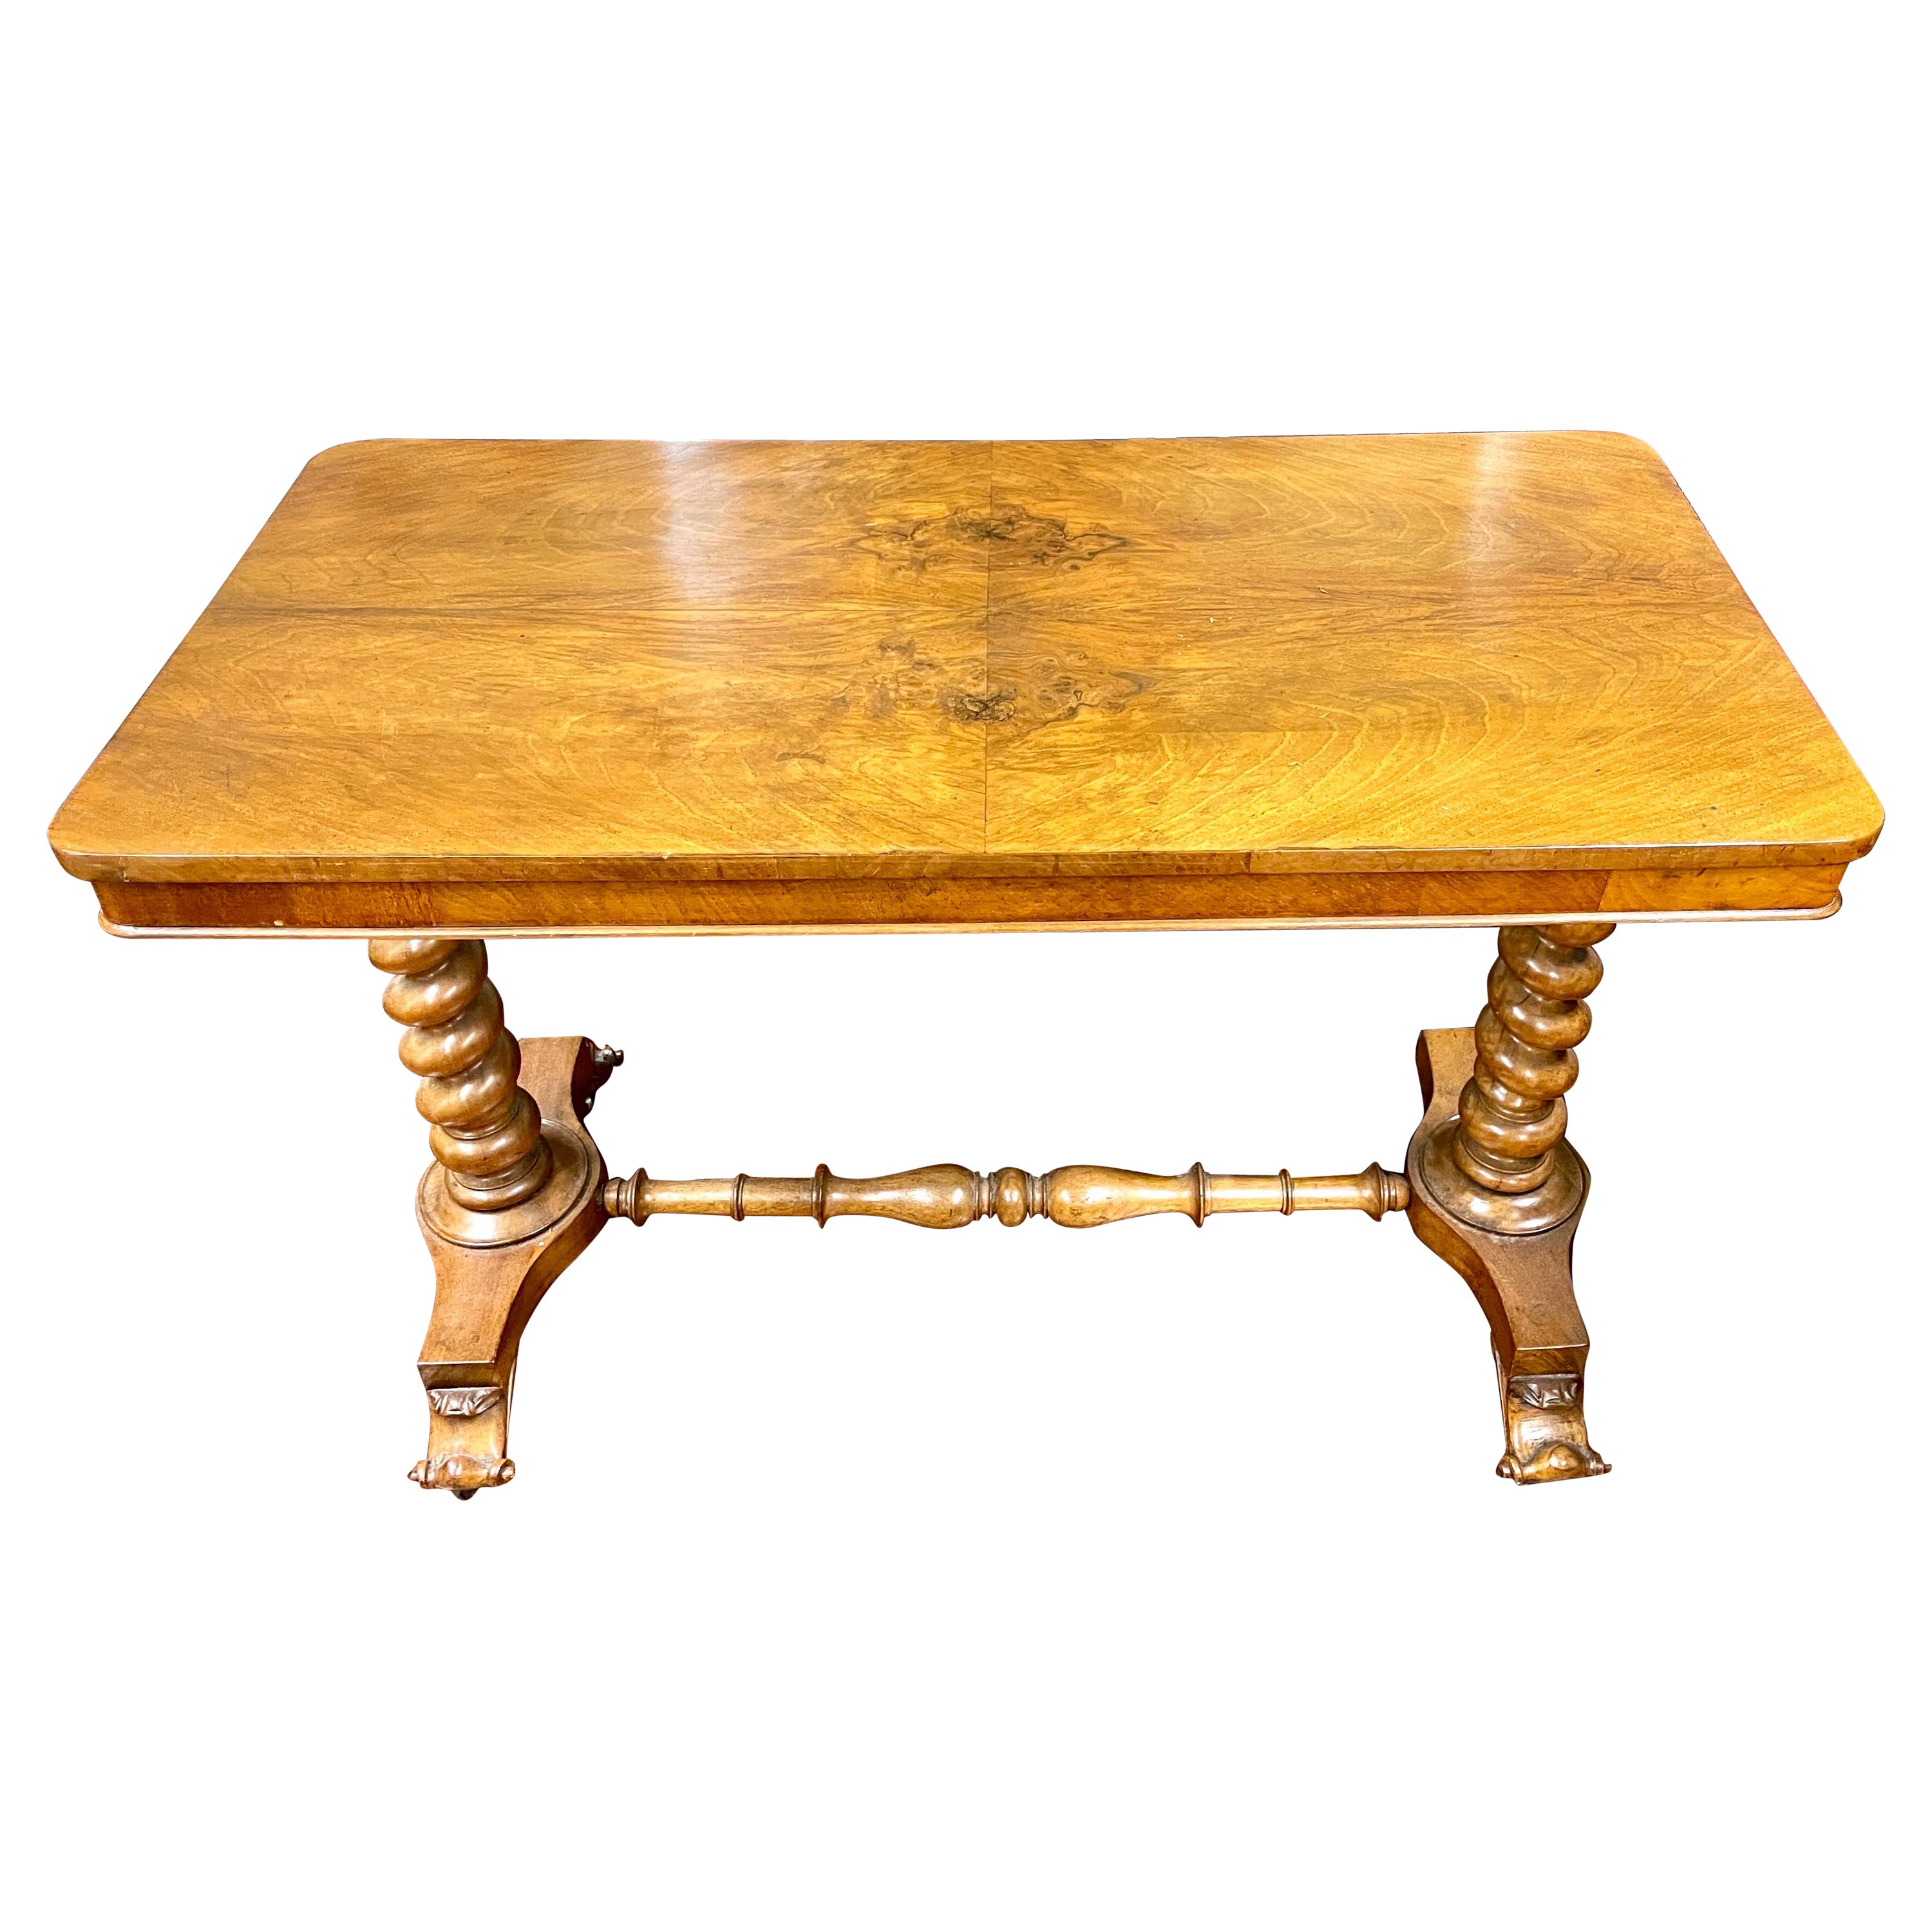 Fine Antique English Burr Walnut Console or Library Table with Barley Twist Legs